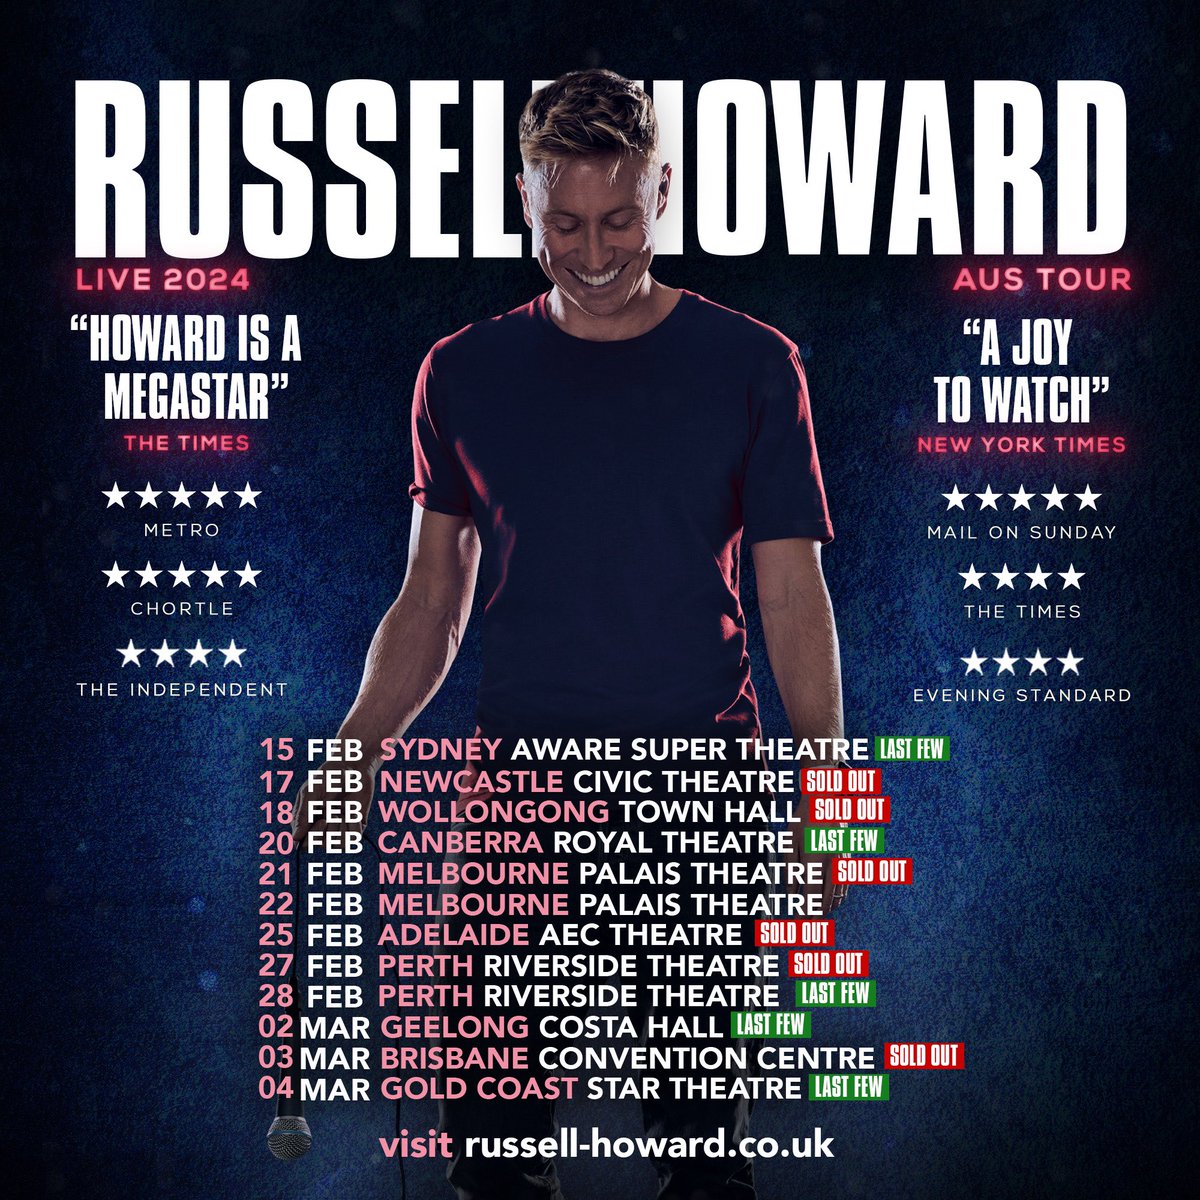 Can’t wait to kick off the Australian leg of my tour this week! Most dates are sold out and very few remaining on the rest. See you all down under! 🇦🇺 Tix available via: russell-howard.co.uk/home#aus-dates